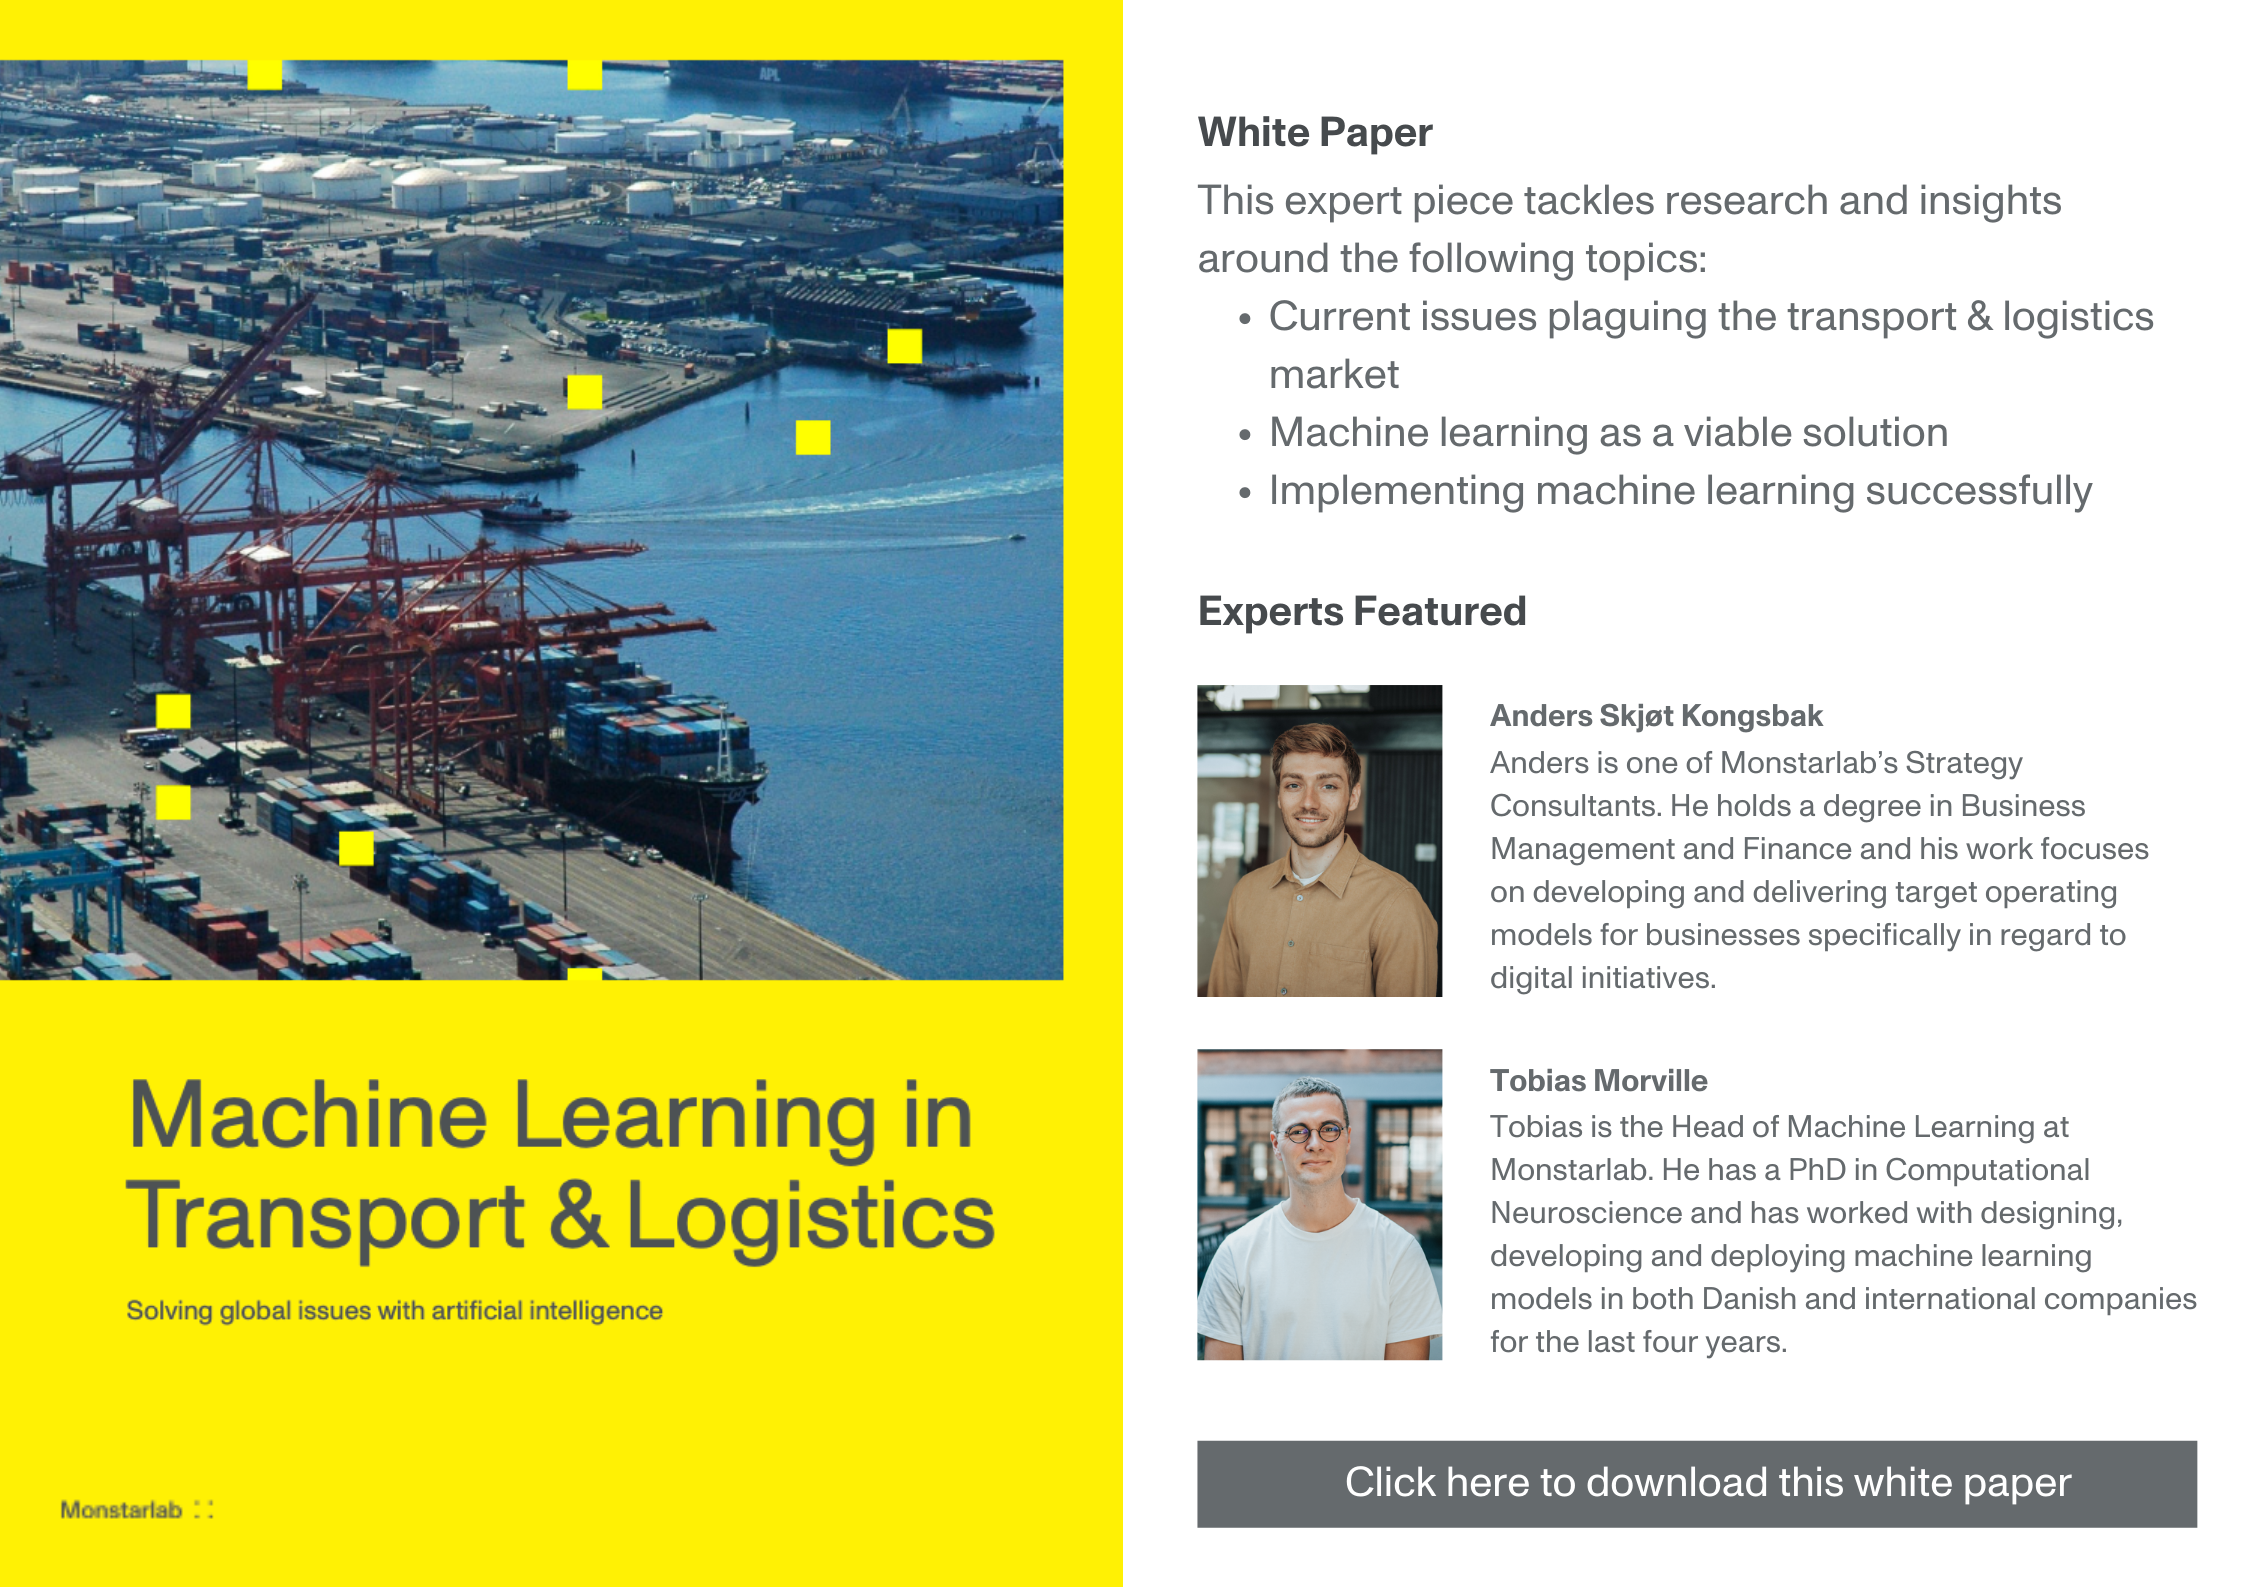 Machine Learning in Transport & Logistics White Paper